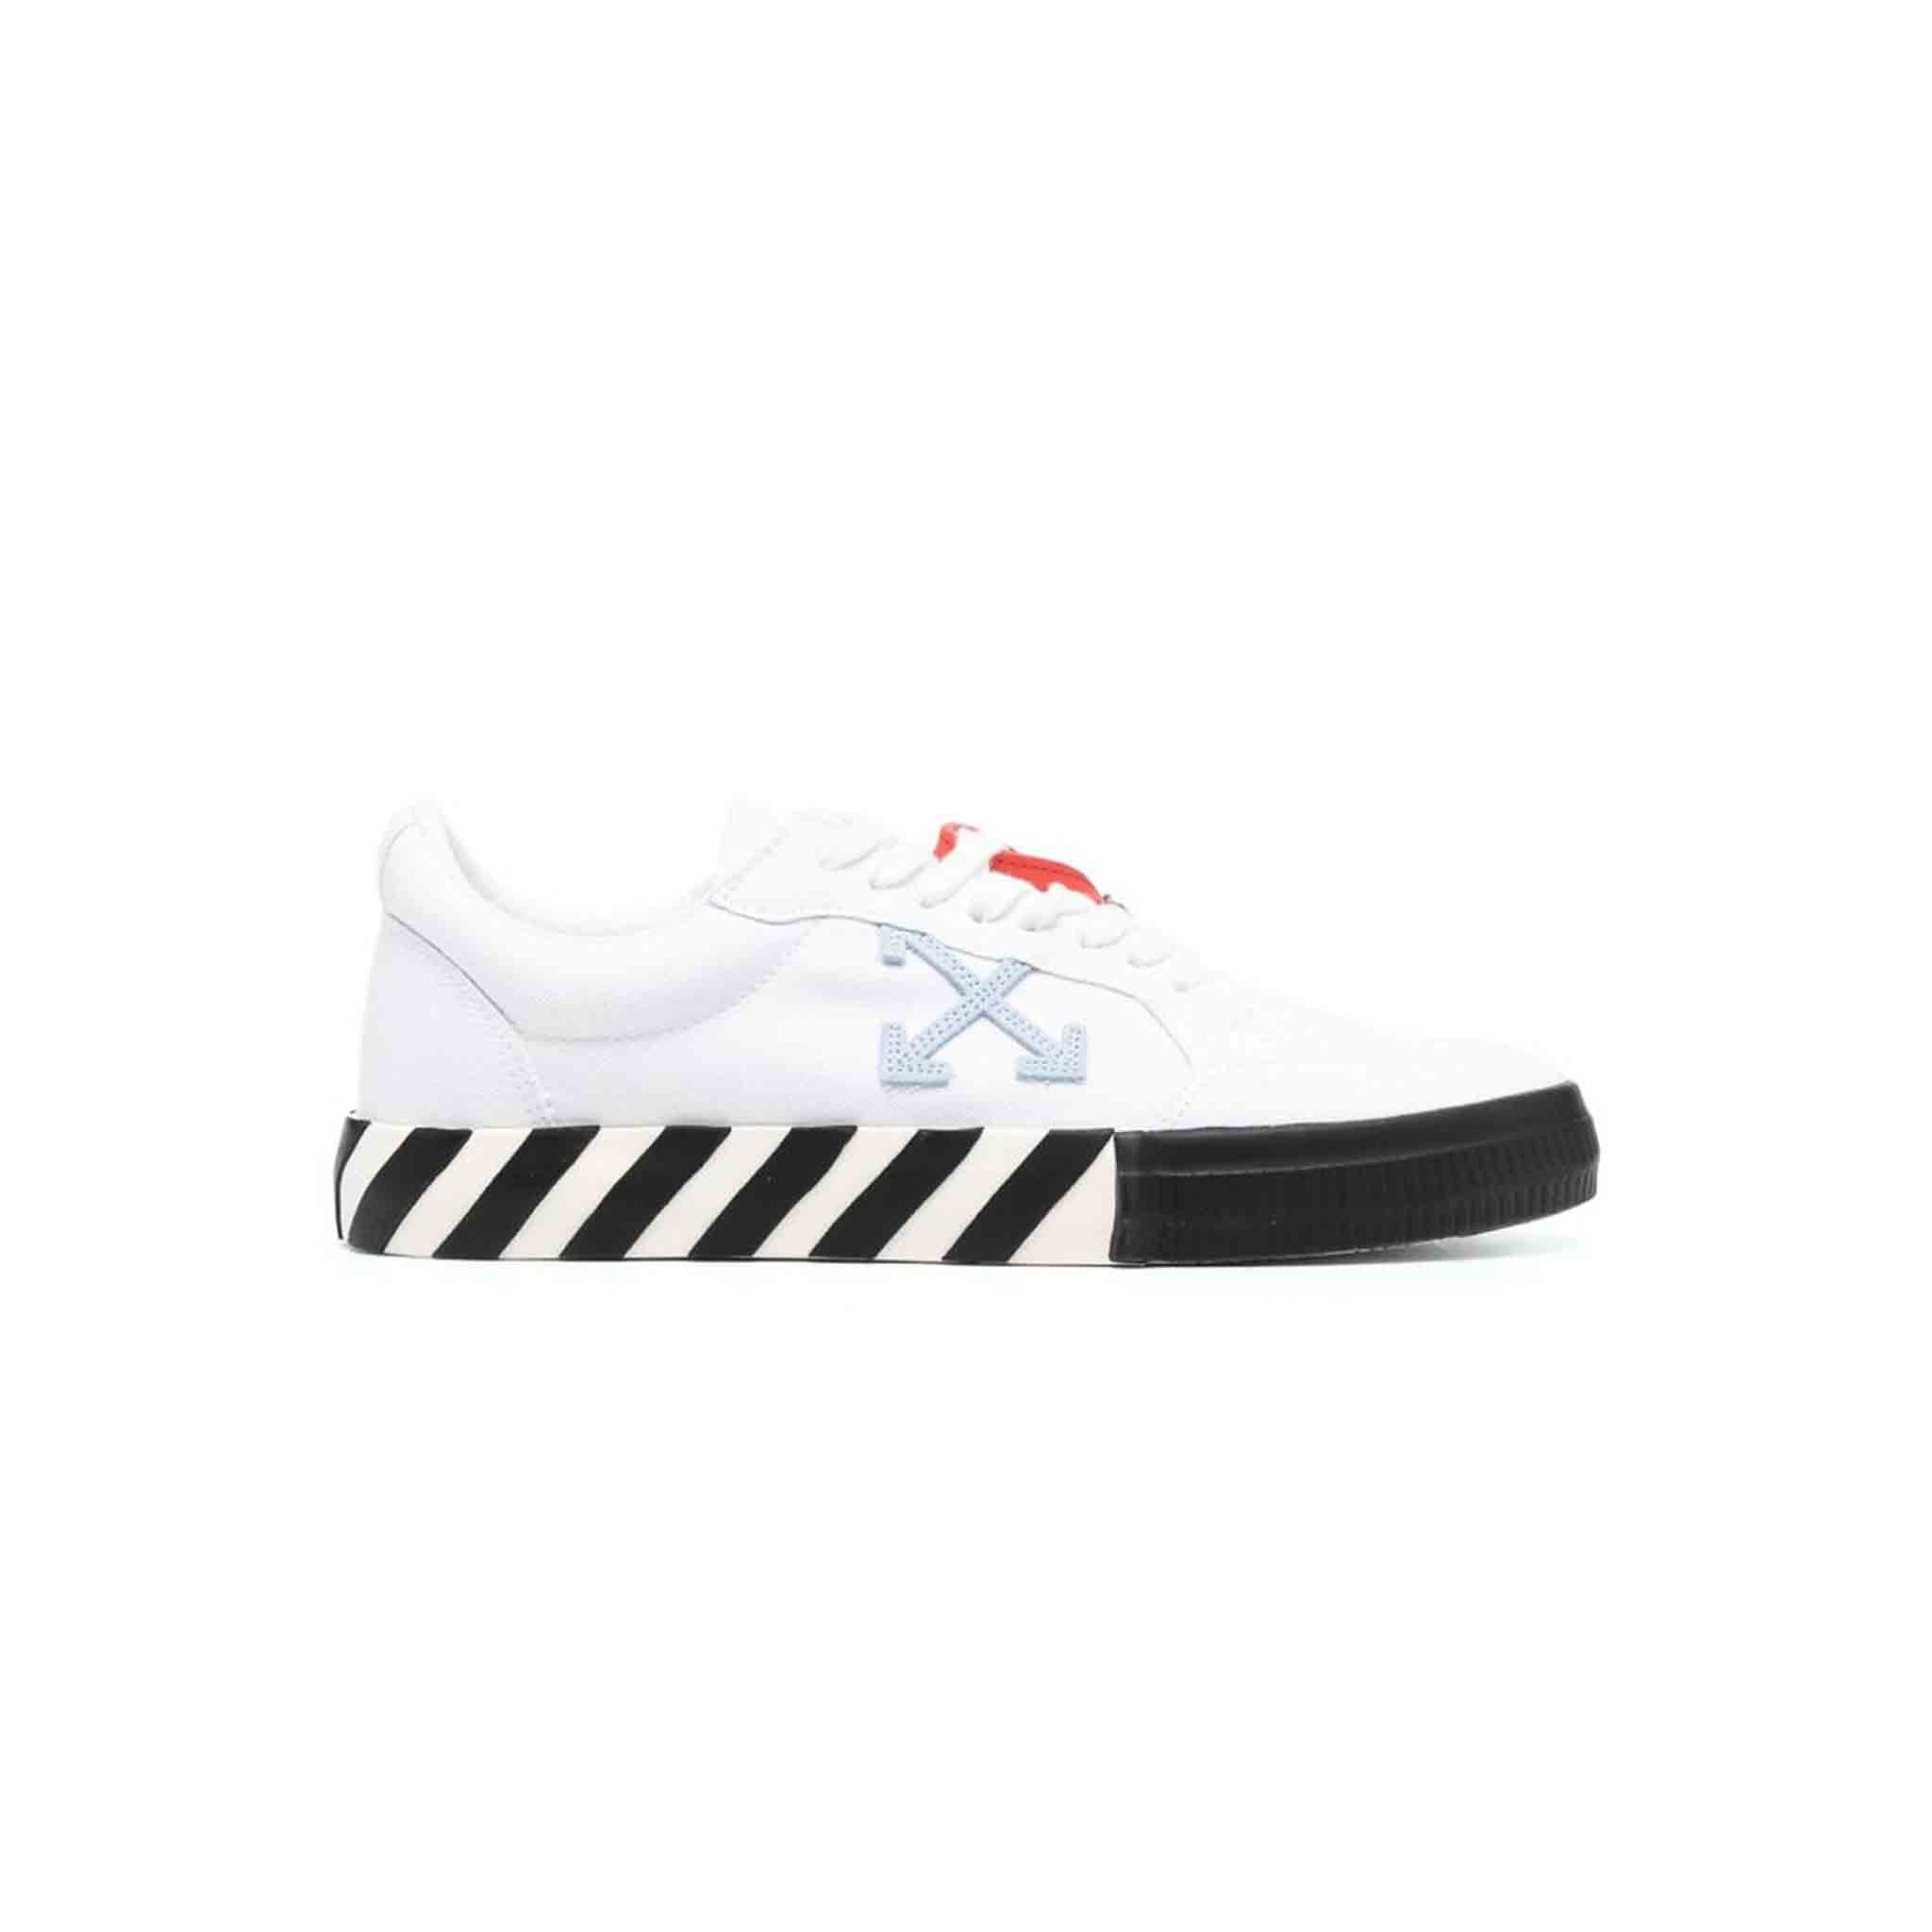 OFF-WHITE Low Vulcanized Canvas in White/Light Blue